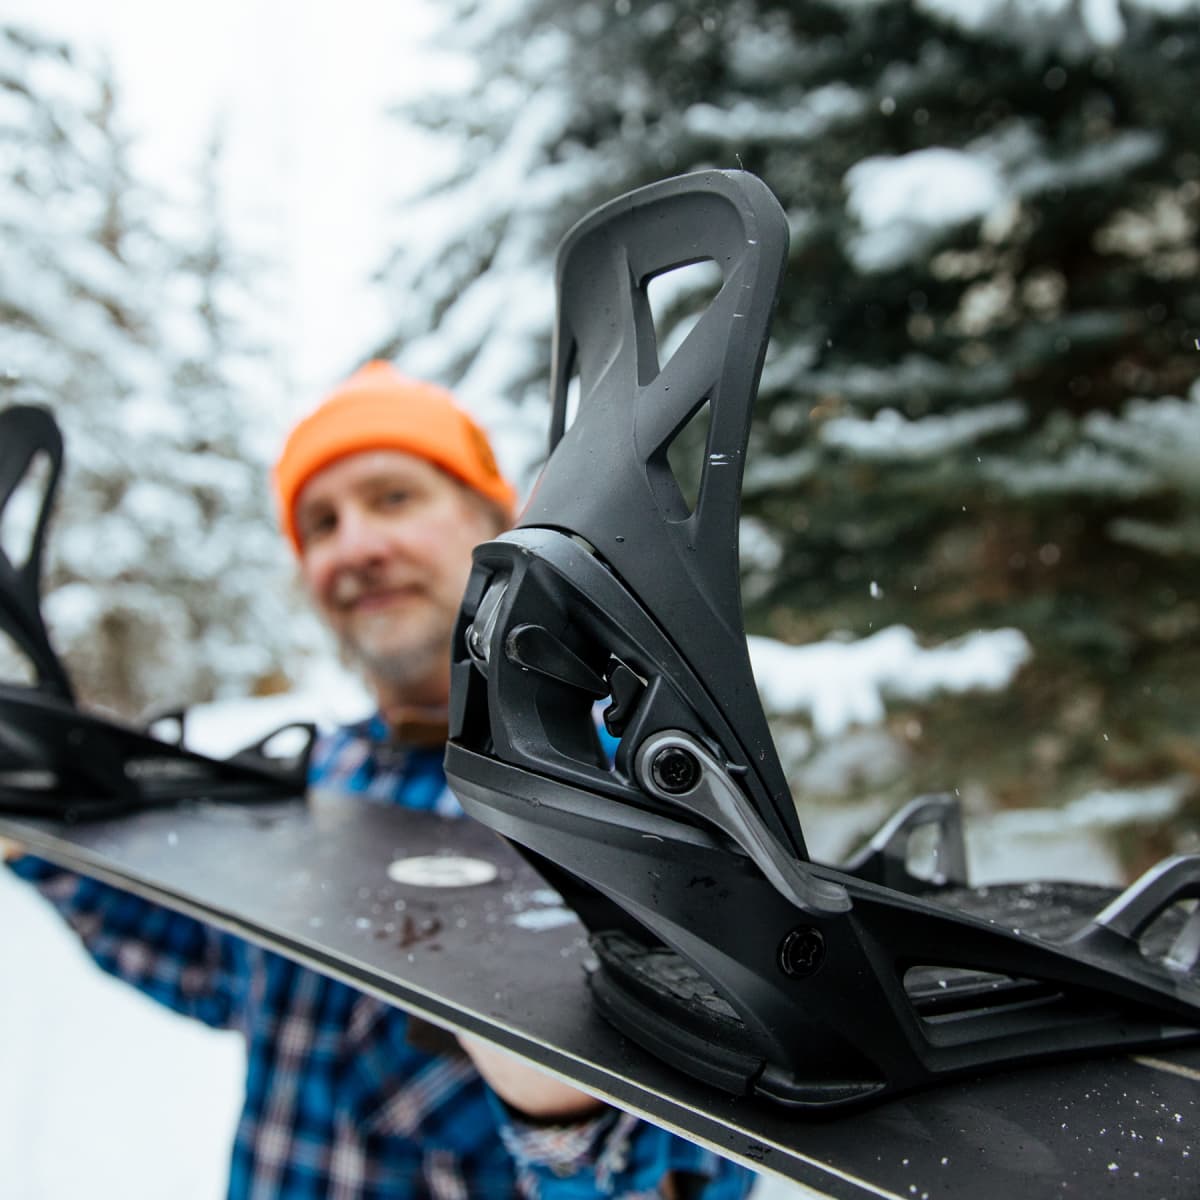 Burton Step On: A Critical Review of a New Step-In Snowboard